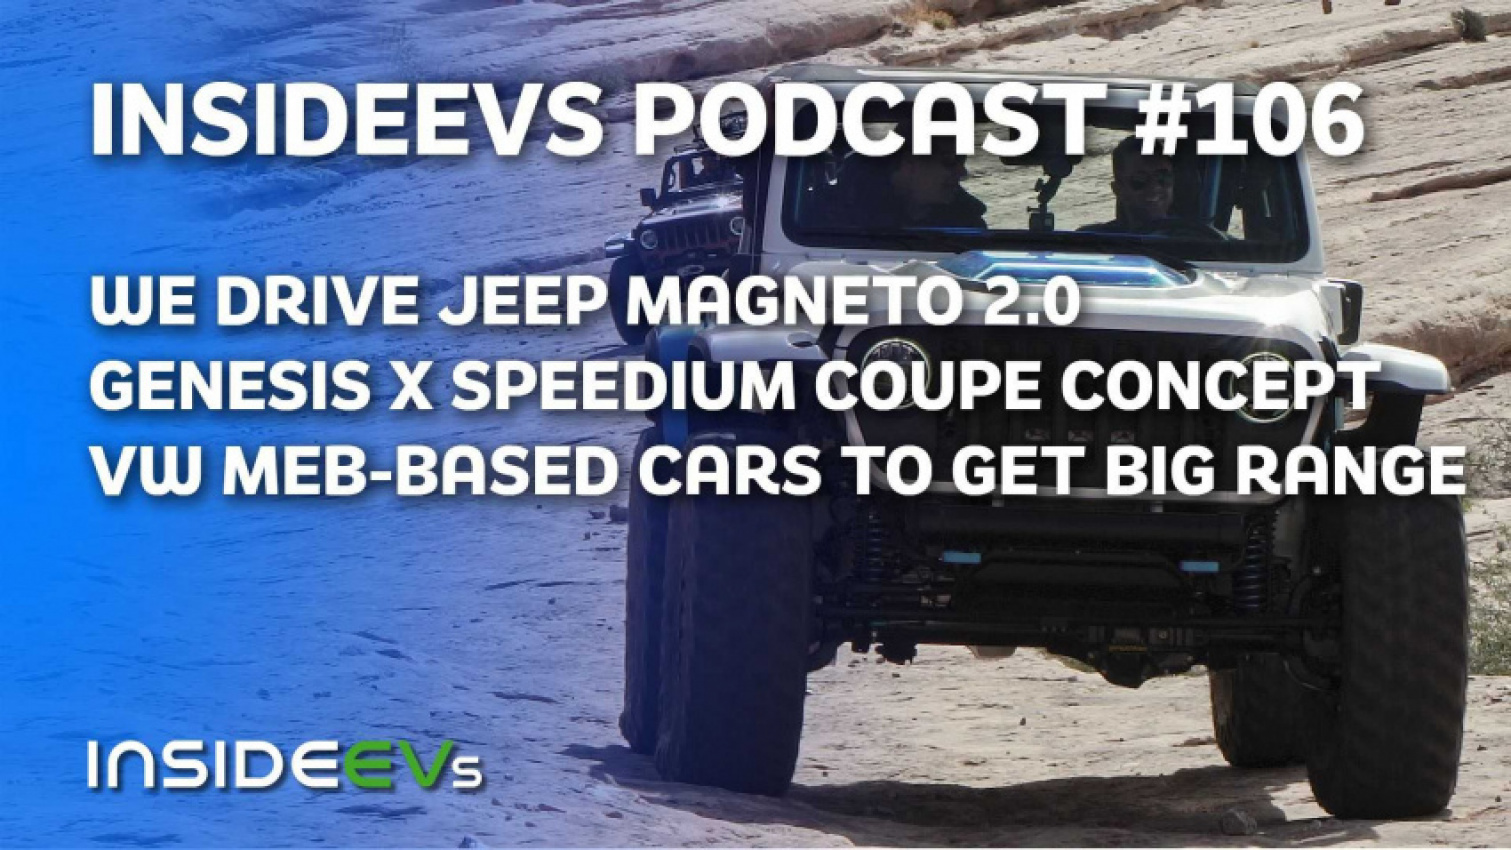 autos, cars, evs, jeep, we drive jeep magneto 2.0, vw meb products getting huge upgrade